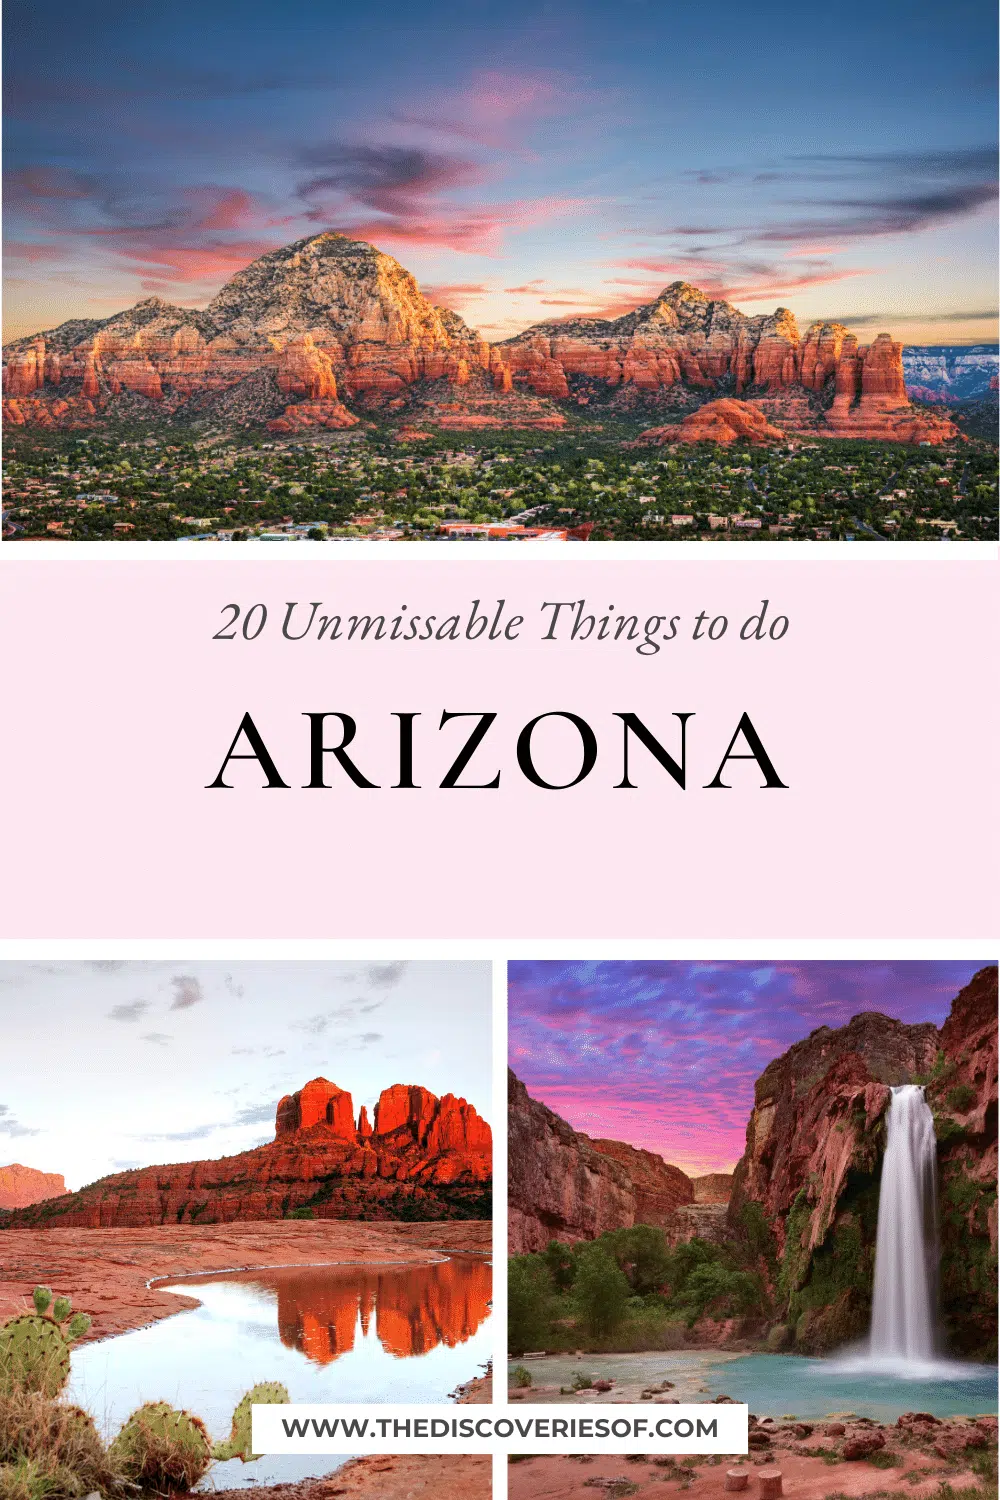 20 Unmissable Things to do in Arizona